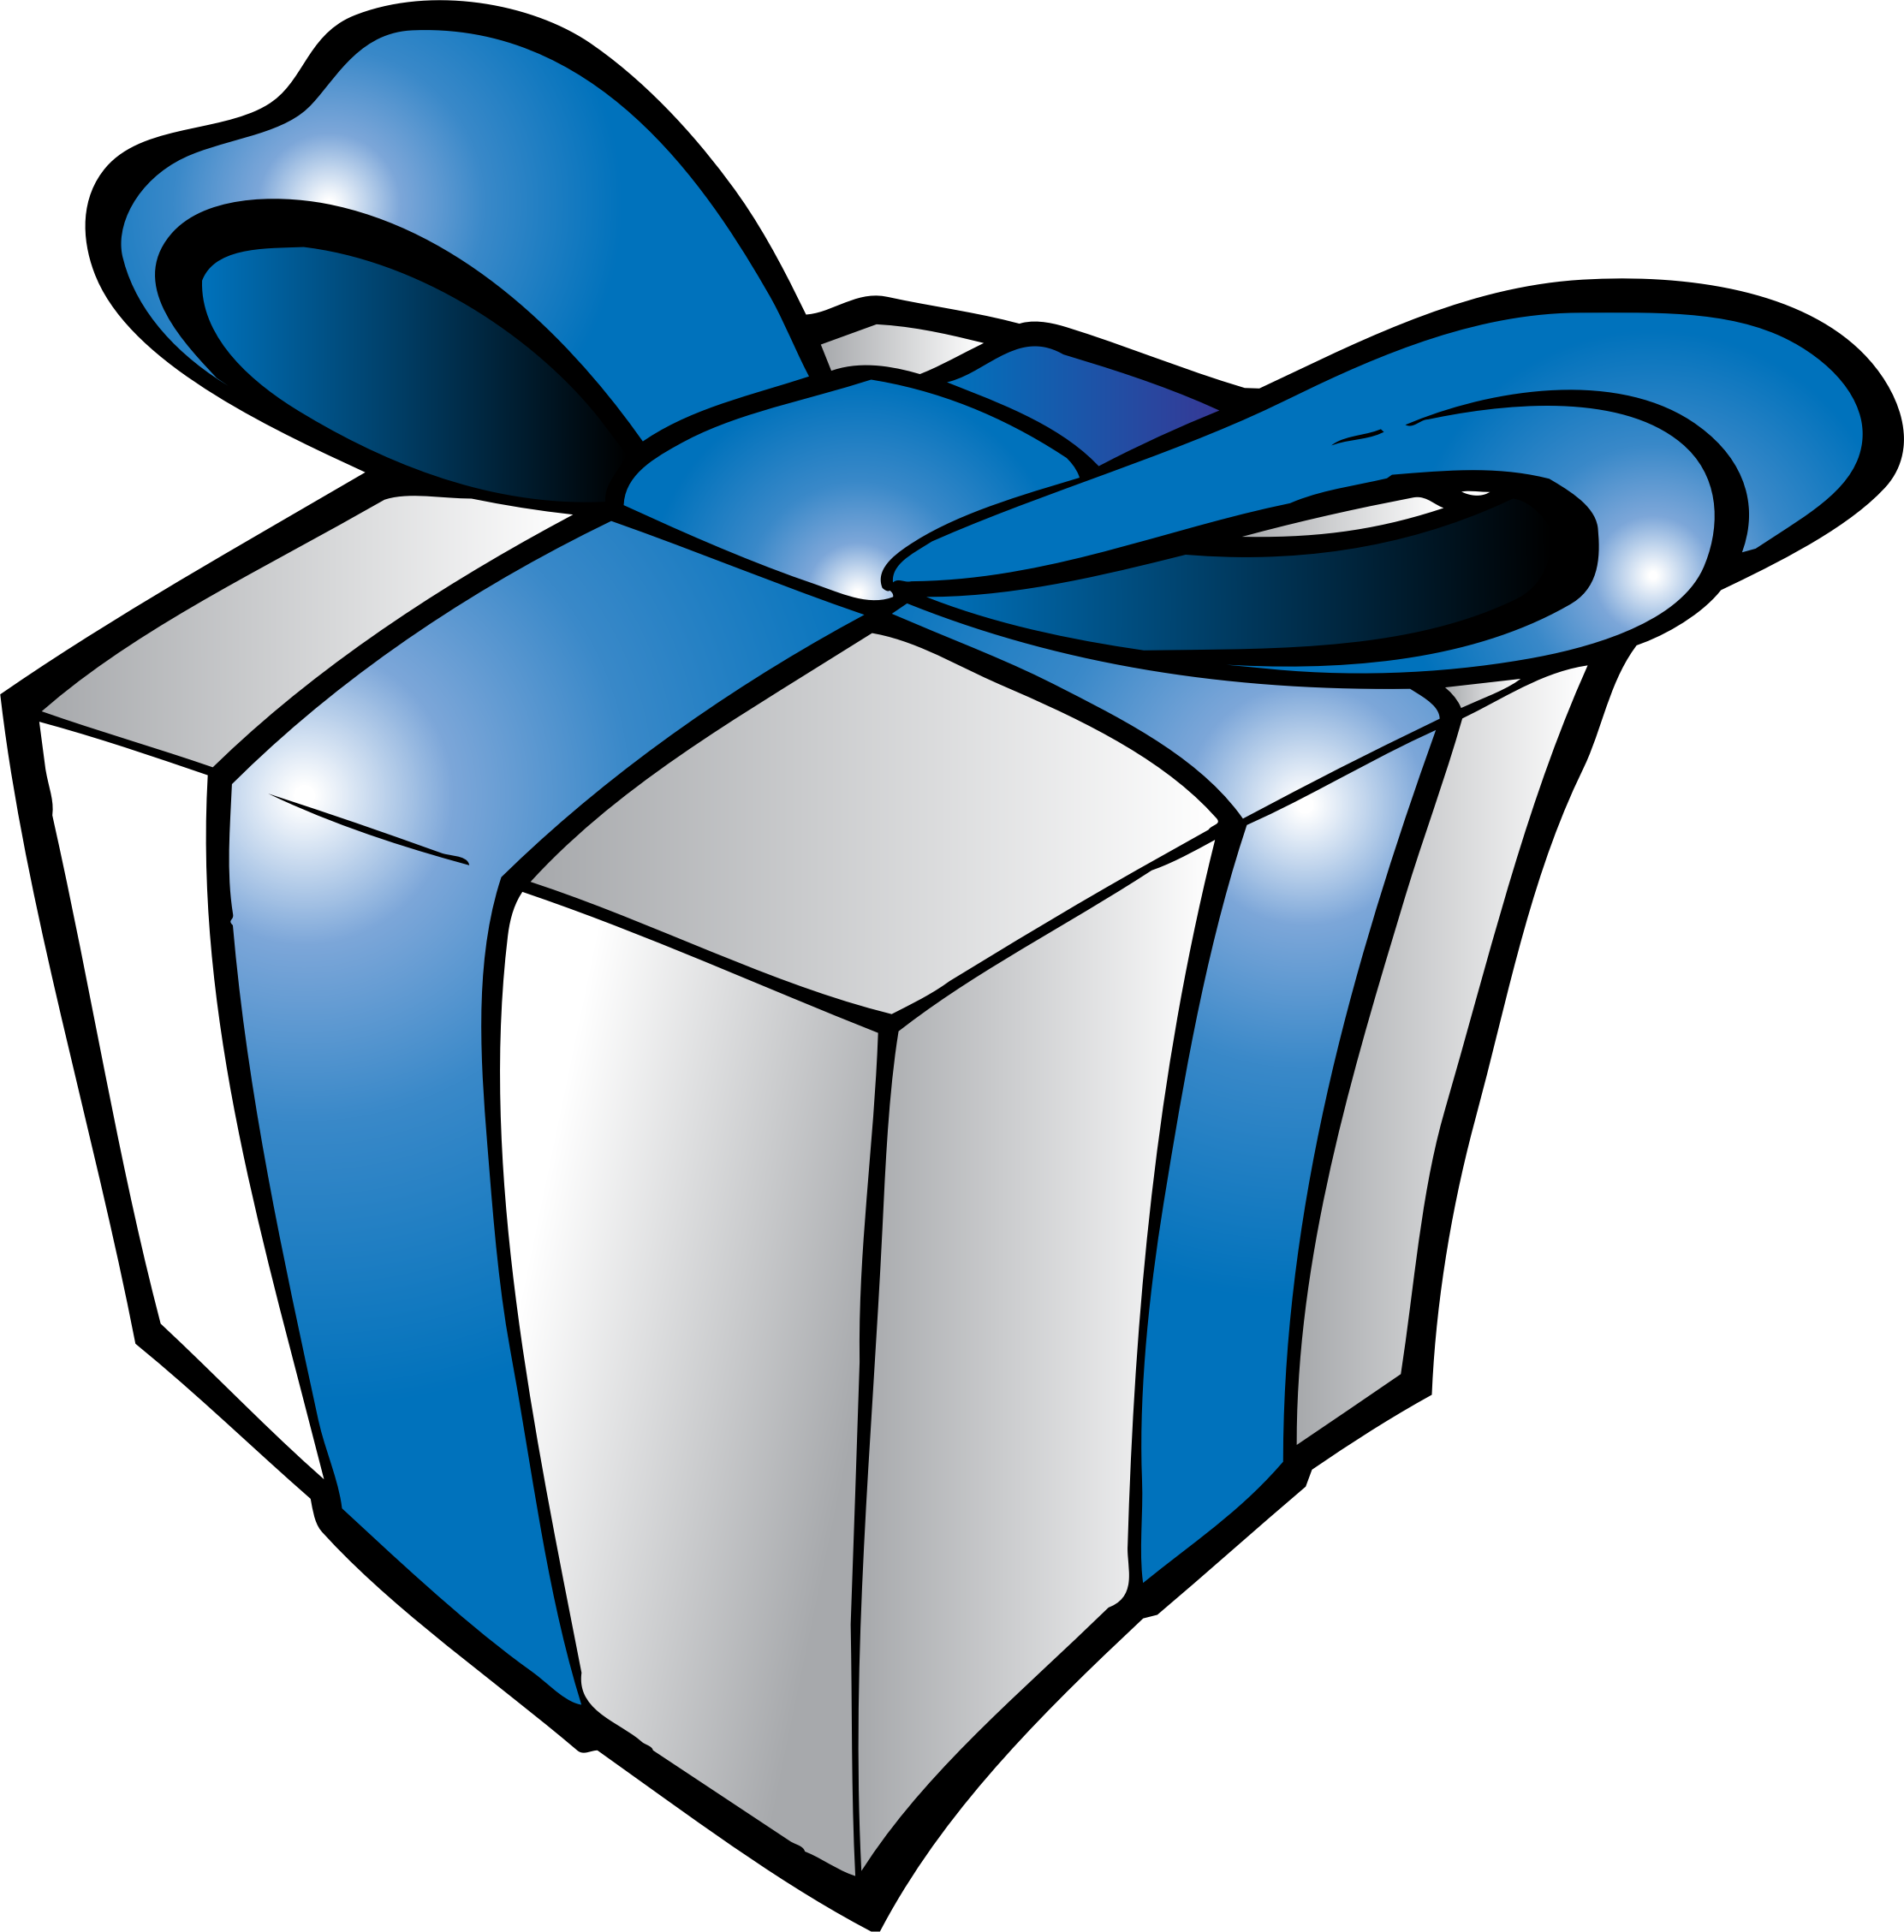 Blue Gift HQ Image Free PNG Image